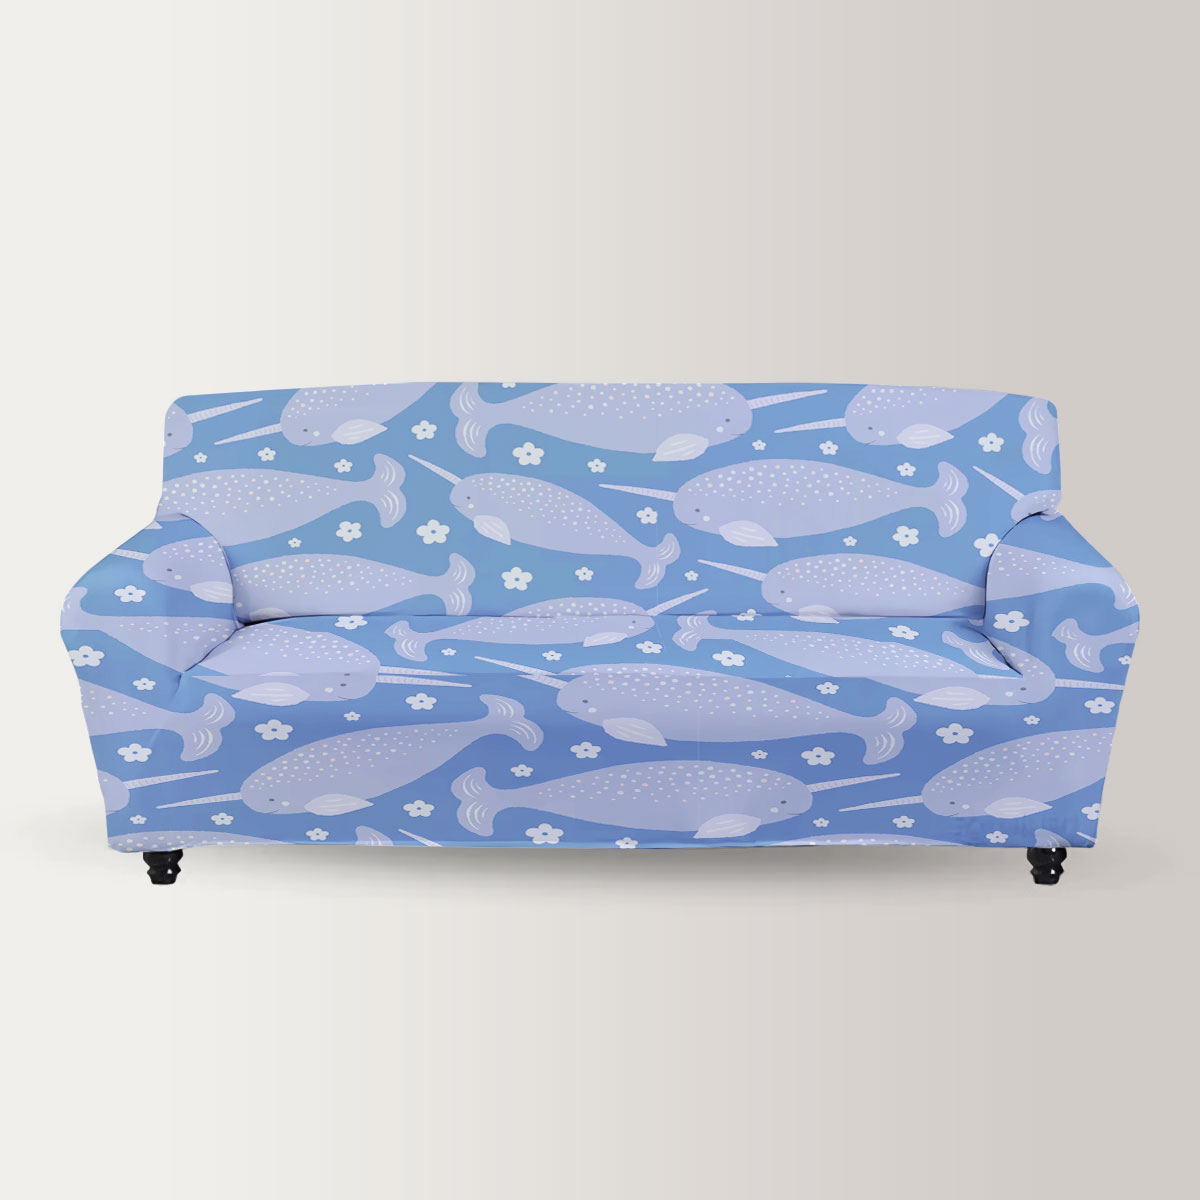 Floral Narwhal Sofa Cover